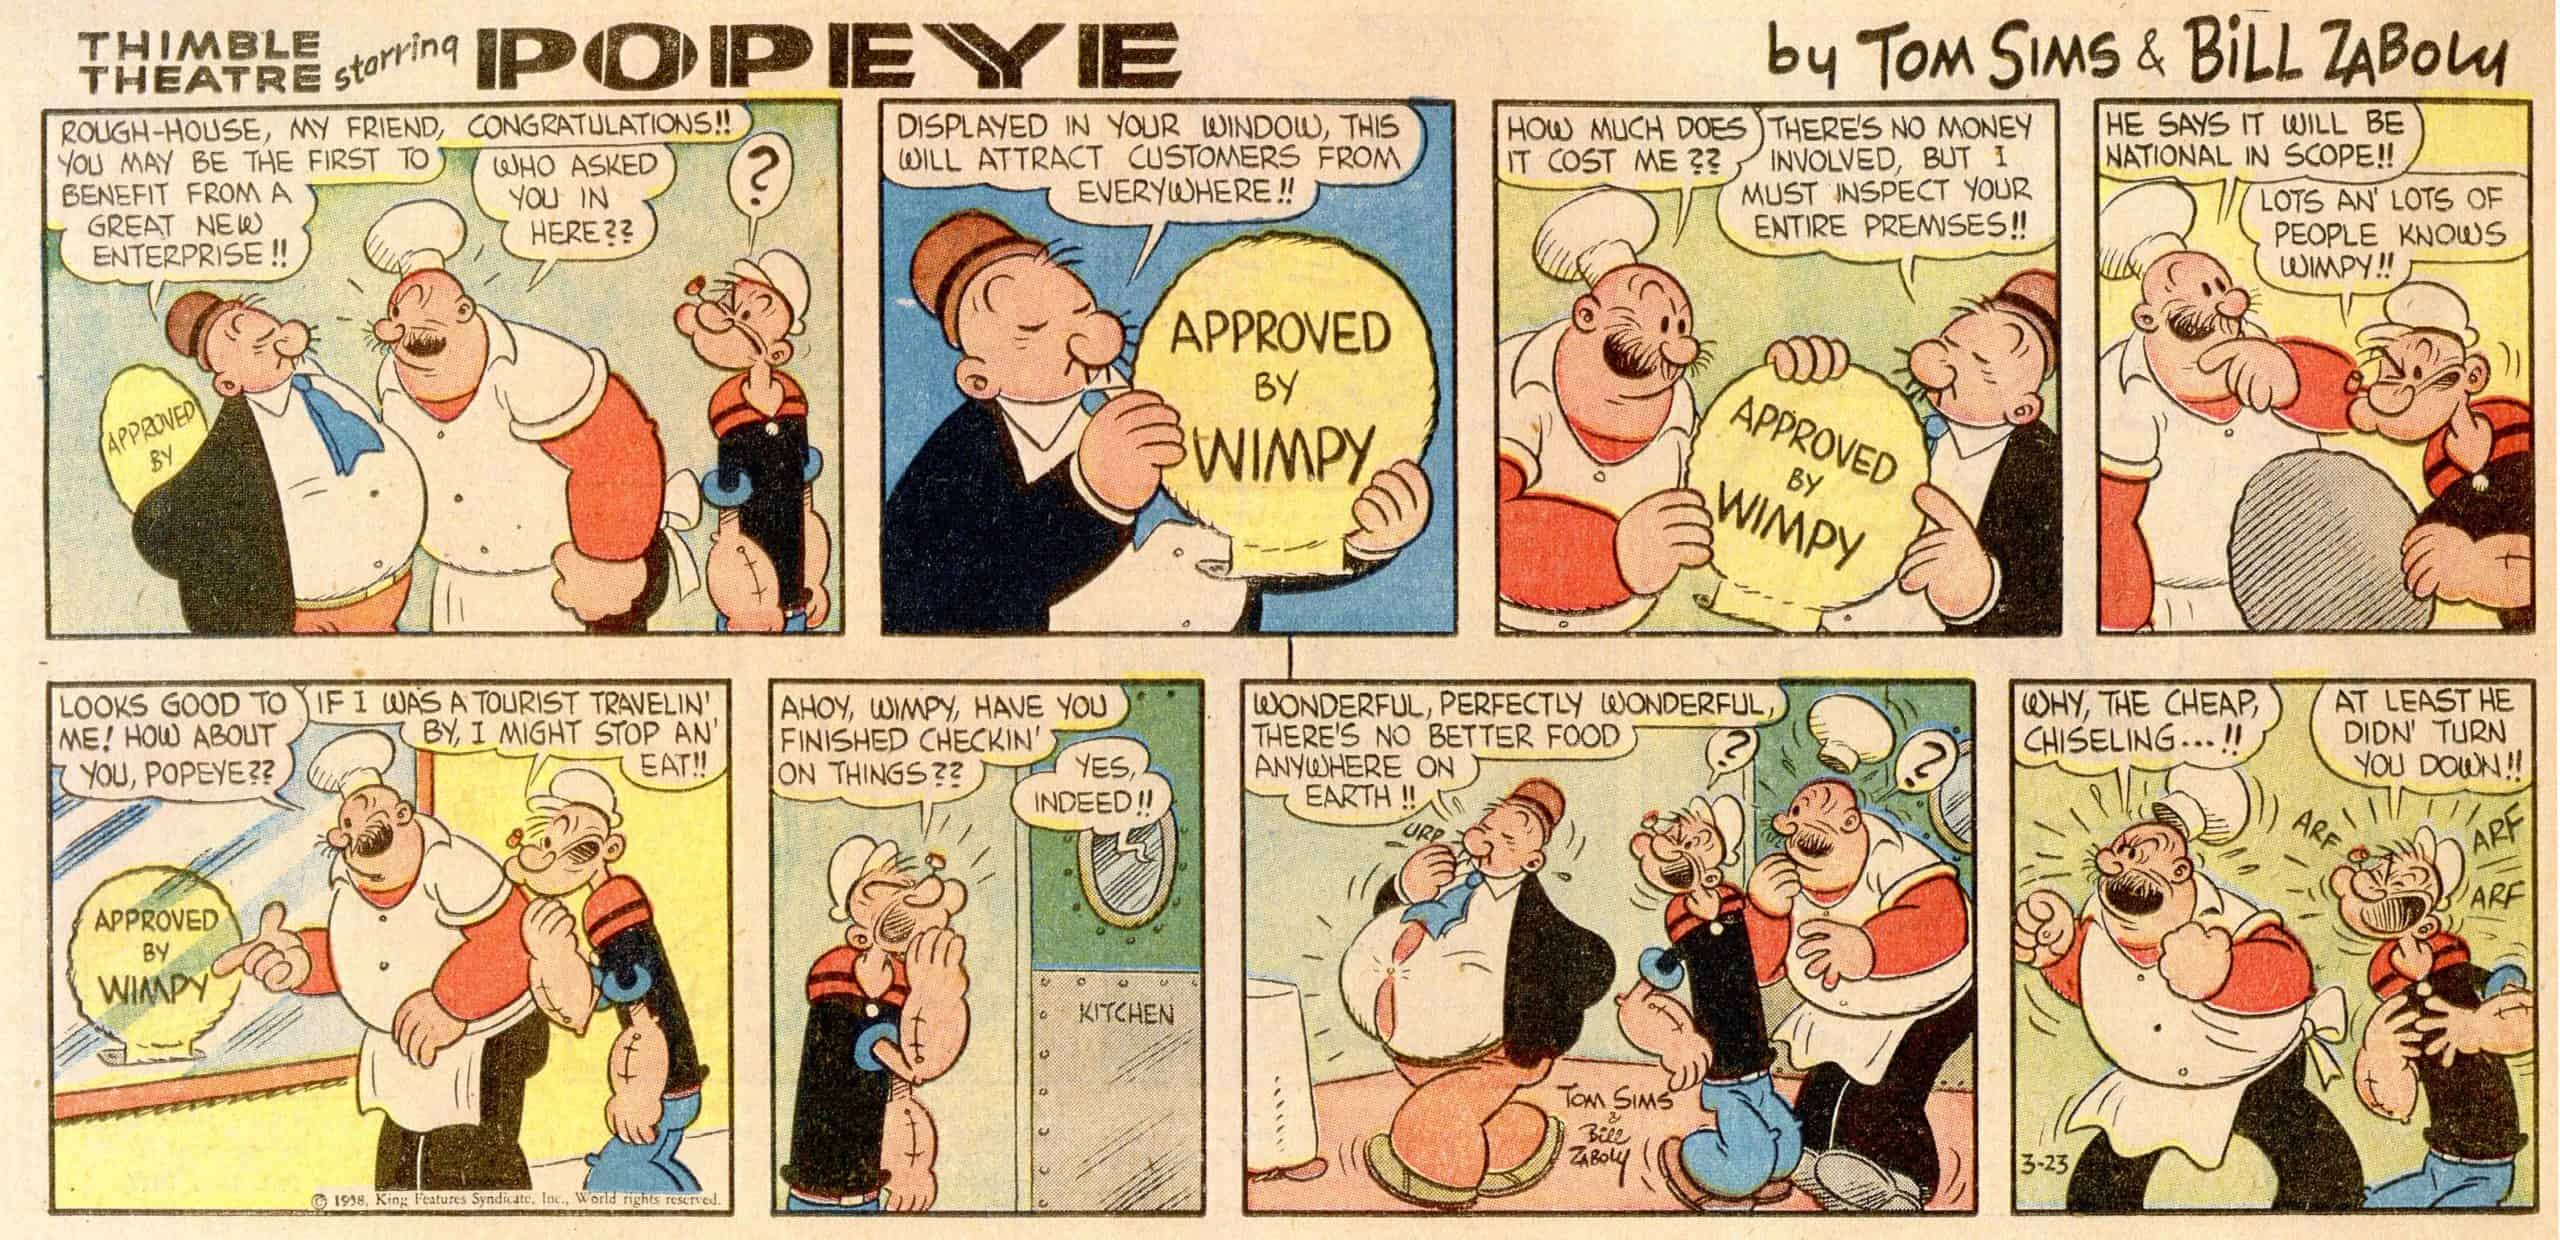 Wimpy comes up with another scheme to obtain free food. From March 23, 1958 by Bill Zaboly (artist) and Tom Sims (writer). For the article, Wimpy Celebrates 90 Years of Hamburgers